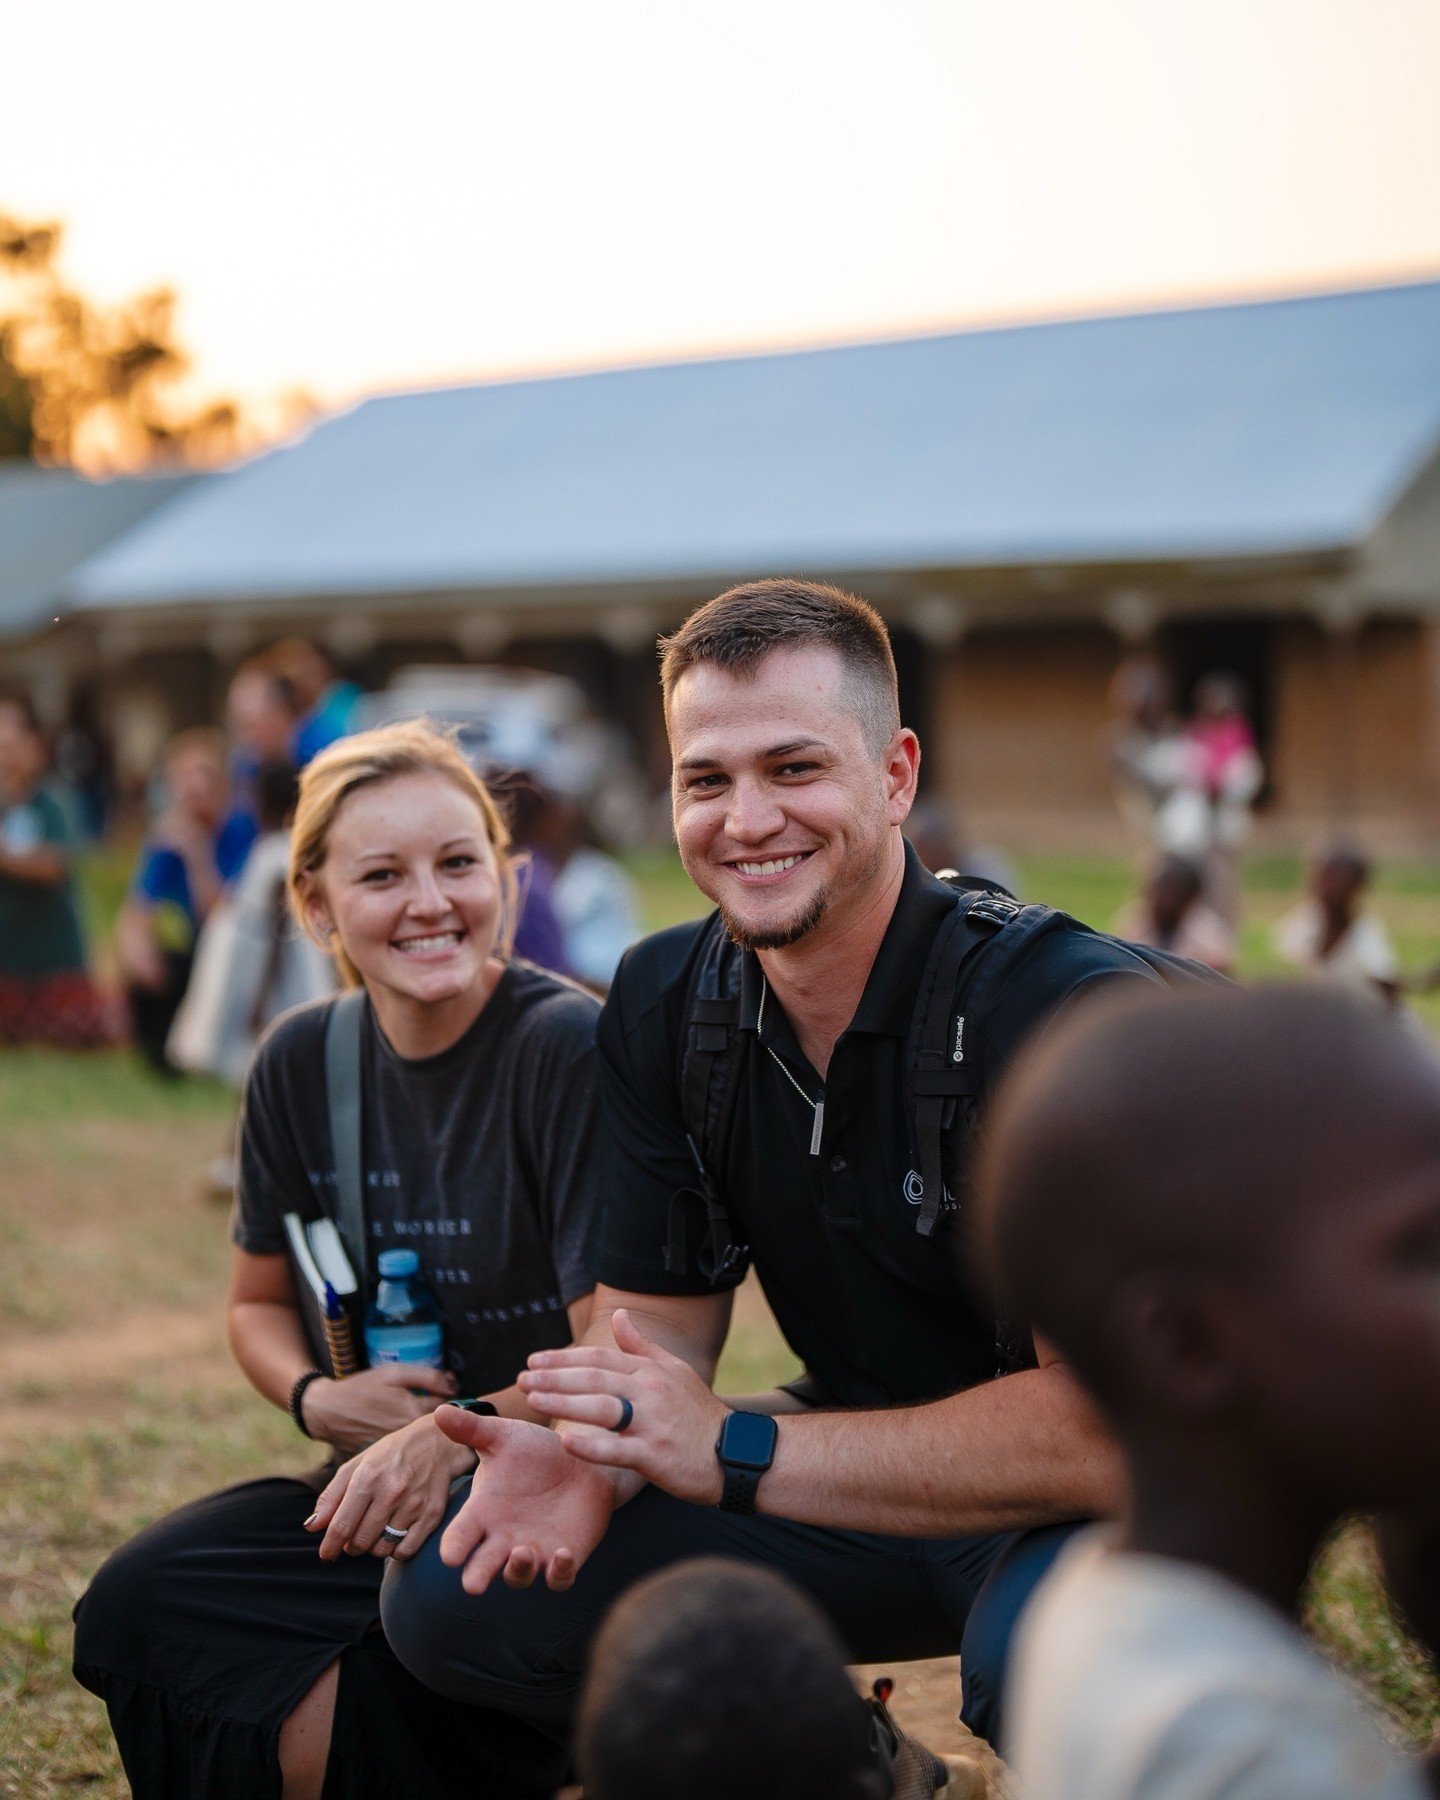 Exciting news!!! After a long and prayer-filled search, we have a new staff member joining our team here at Moyo Missions. We are excited to introduce to you Jacob Ross as the Director of Missions Mobilization! His primary responsibility will be the 